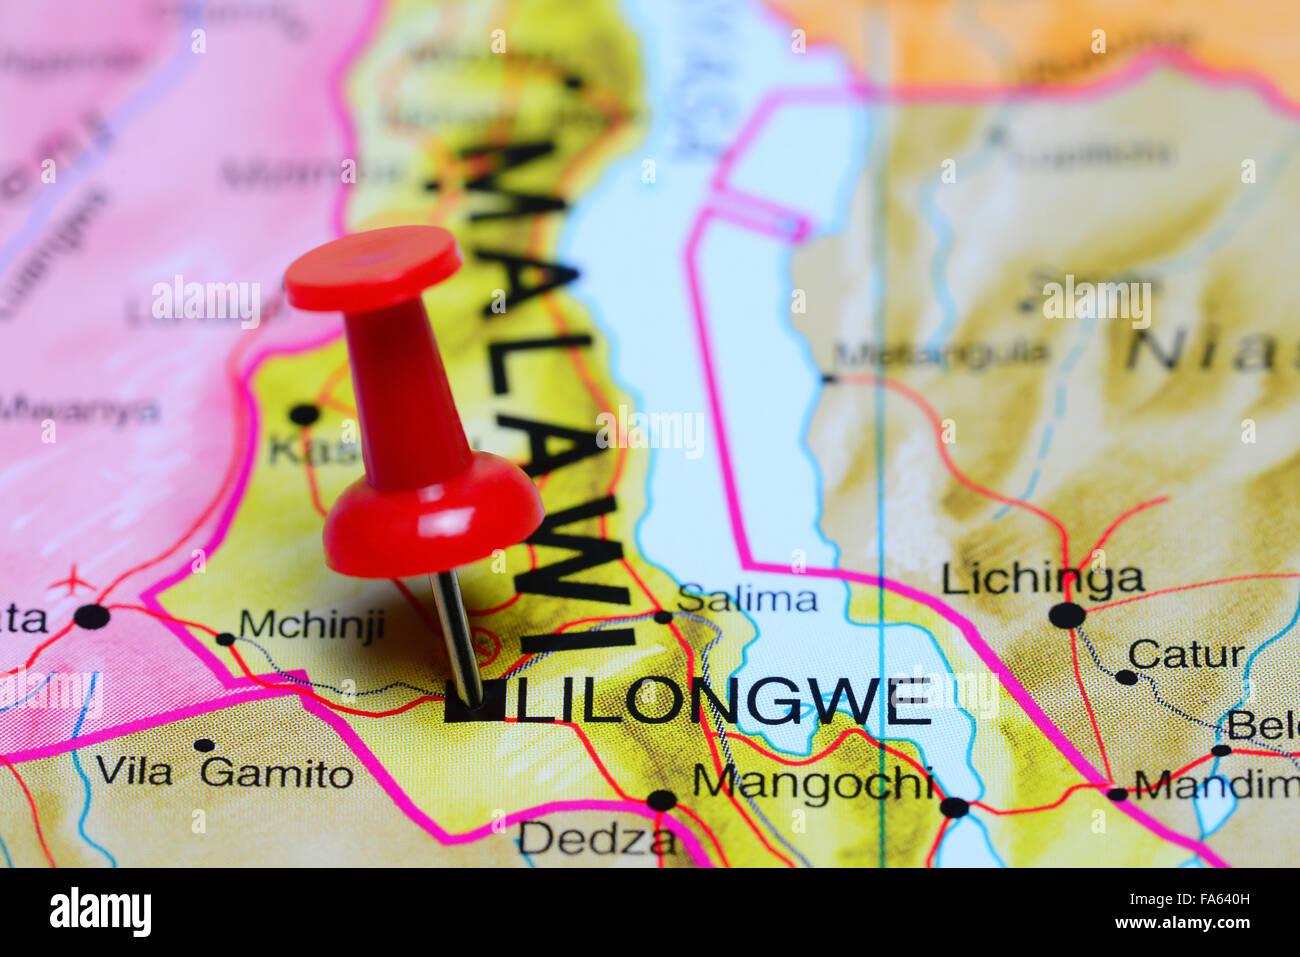 Lilongwe pinned on a map of Africa Stock Photo